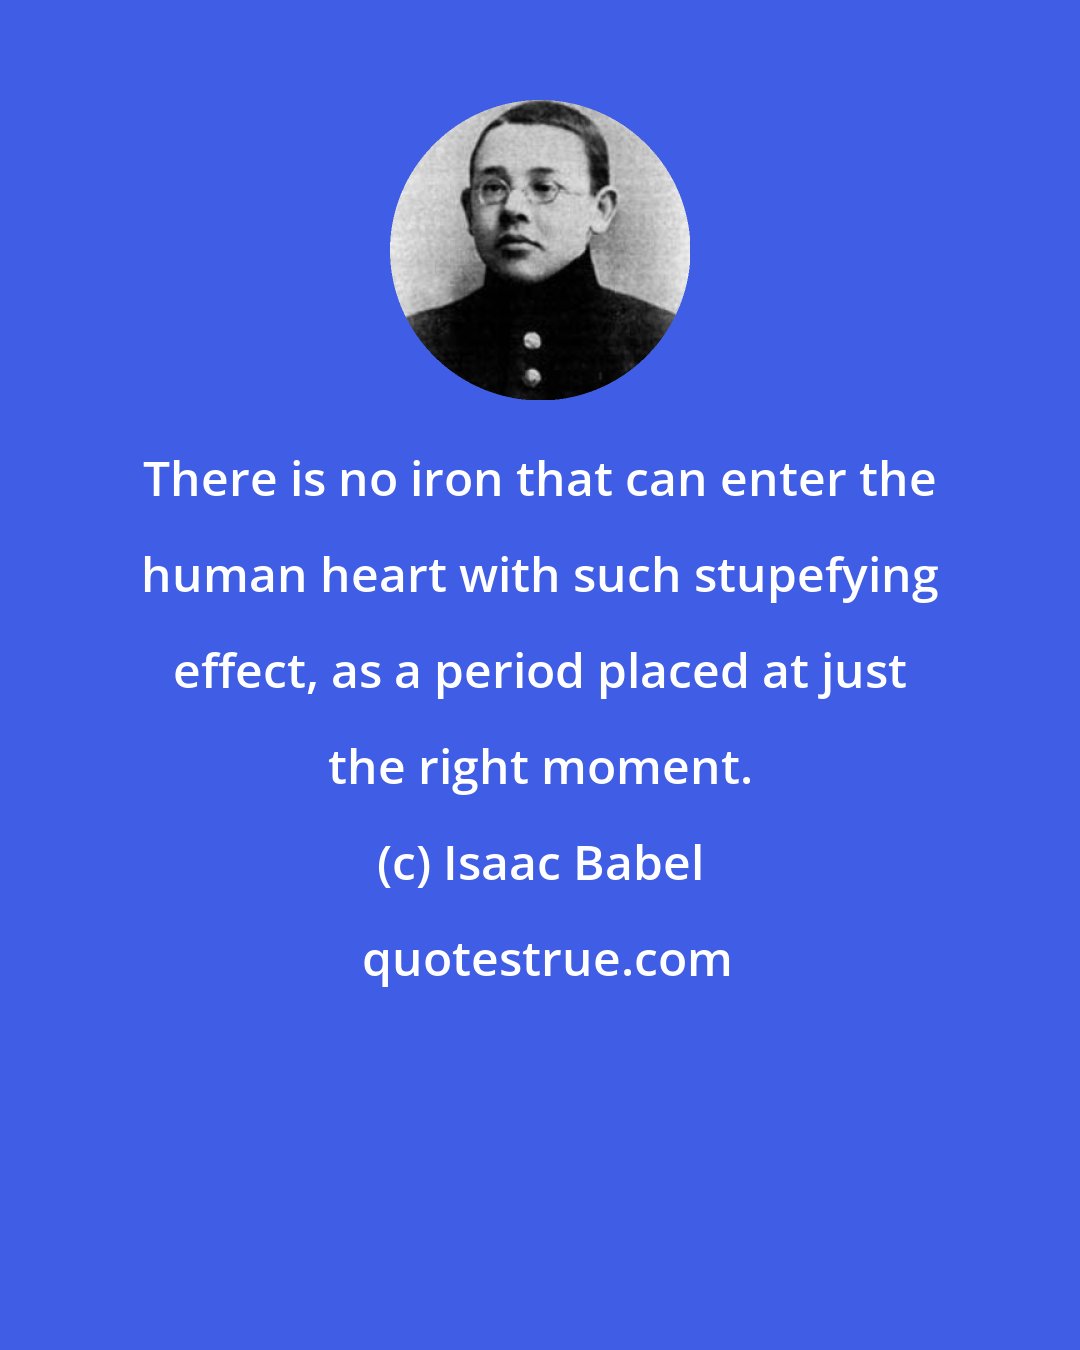 Isaac Babel: There is no iron that can enter the human heart with such stupefying effect, as a period placed at just the right moment.